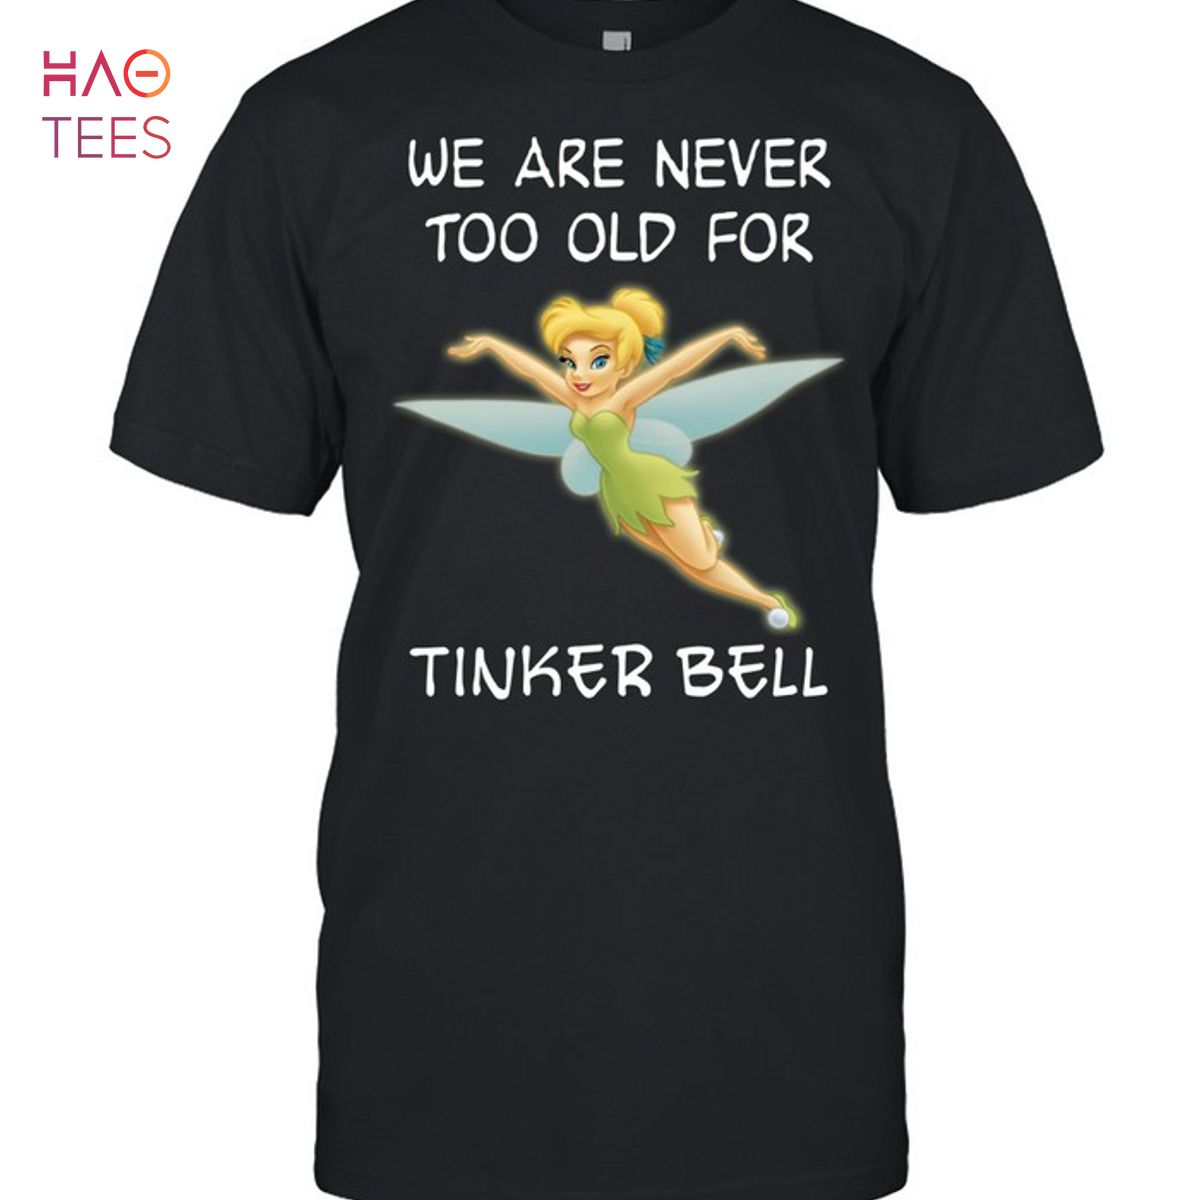 We Are Never Too Old For Tinker Bell T-Shirt